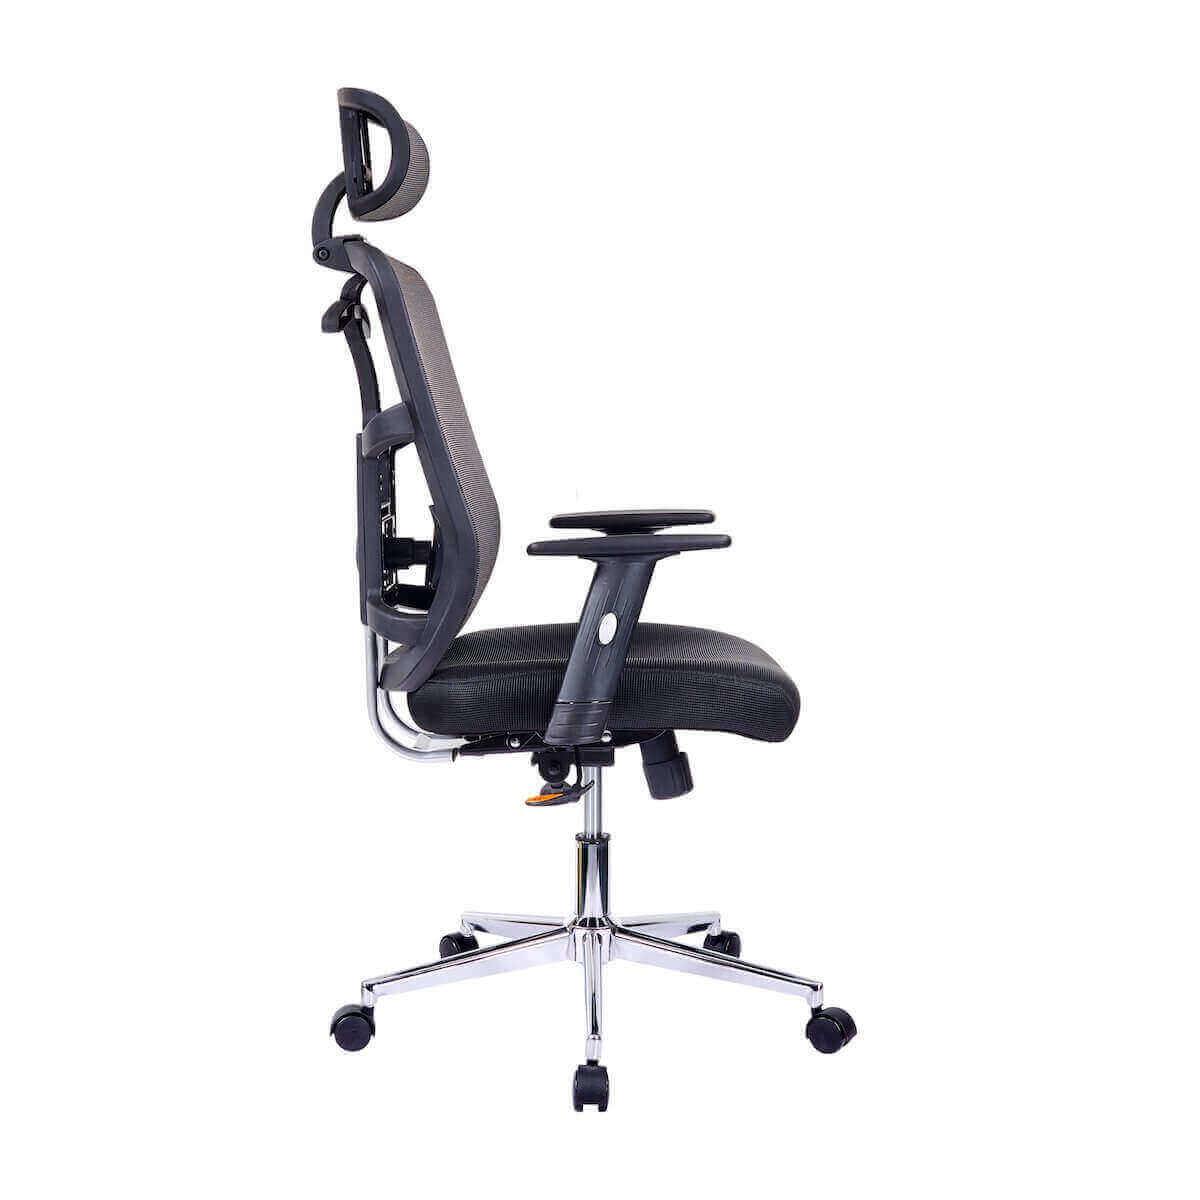 Techni Mobili Black High Back Executive Mesh Office Chair with Arms, Lumbar Support, and Chrome Base RTA-1010-BK Side